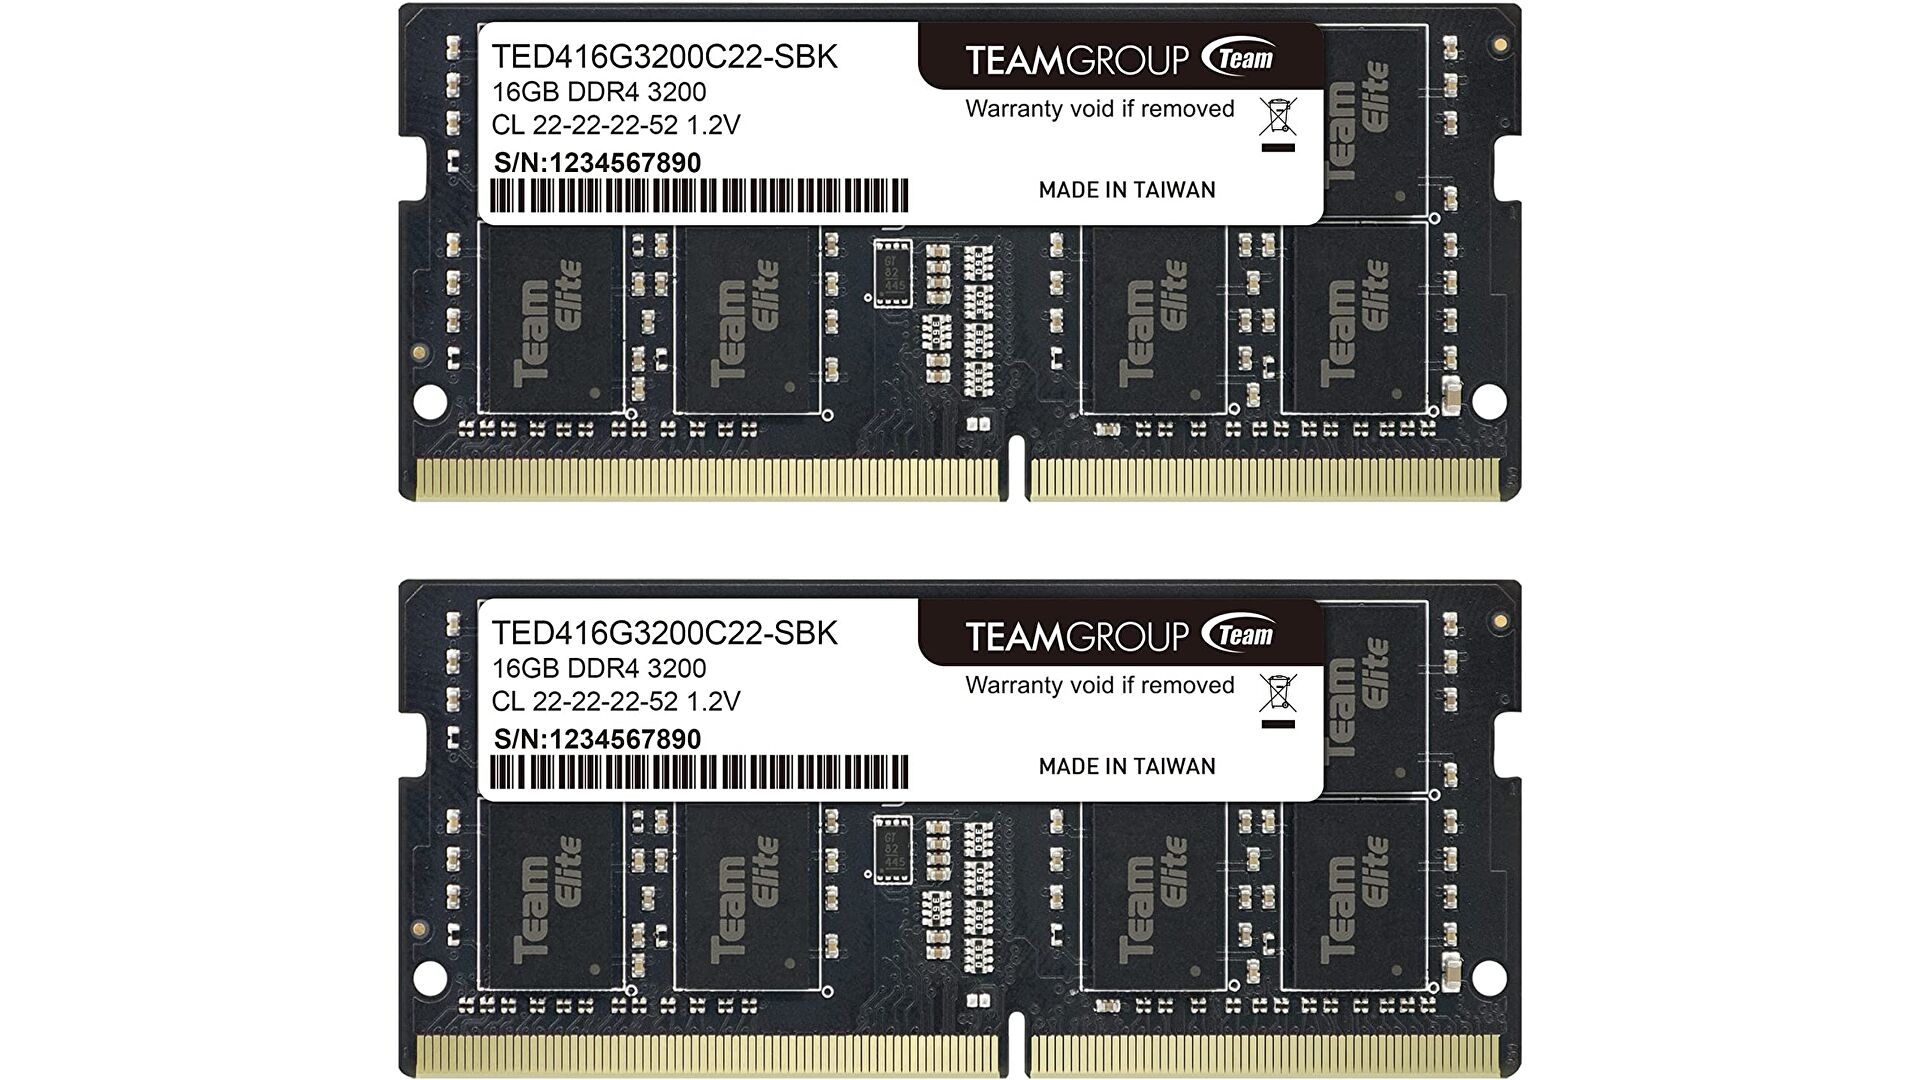 Upgrade your laptop to 32GB of RAM with this kit from TeamGroup